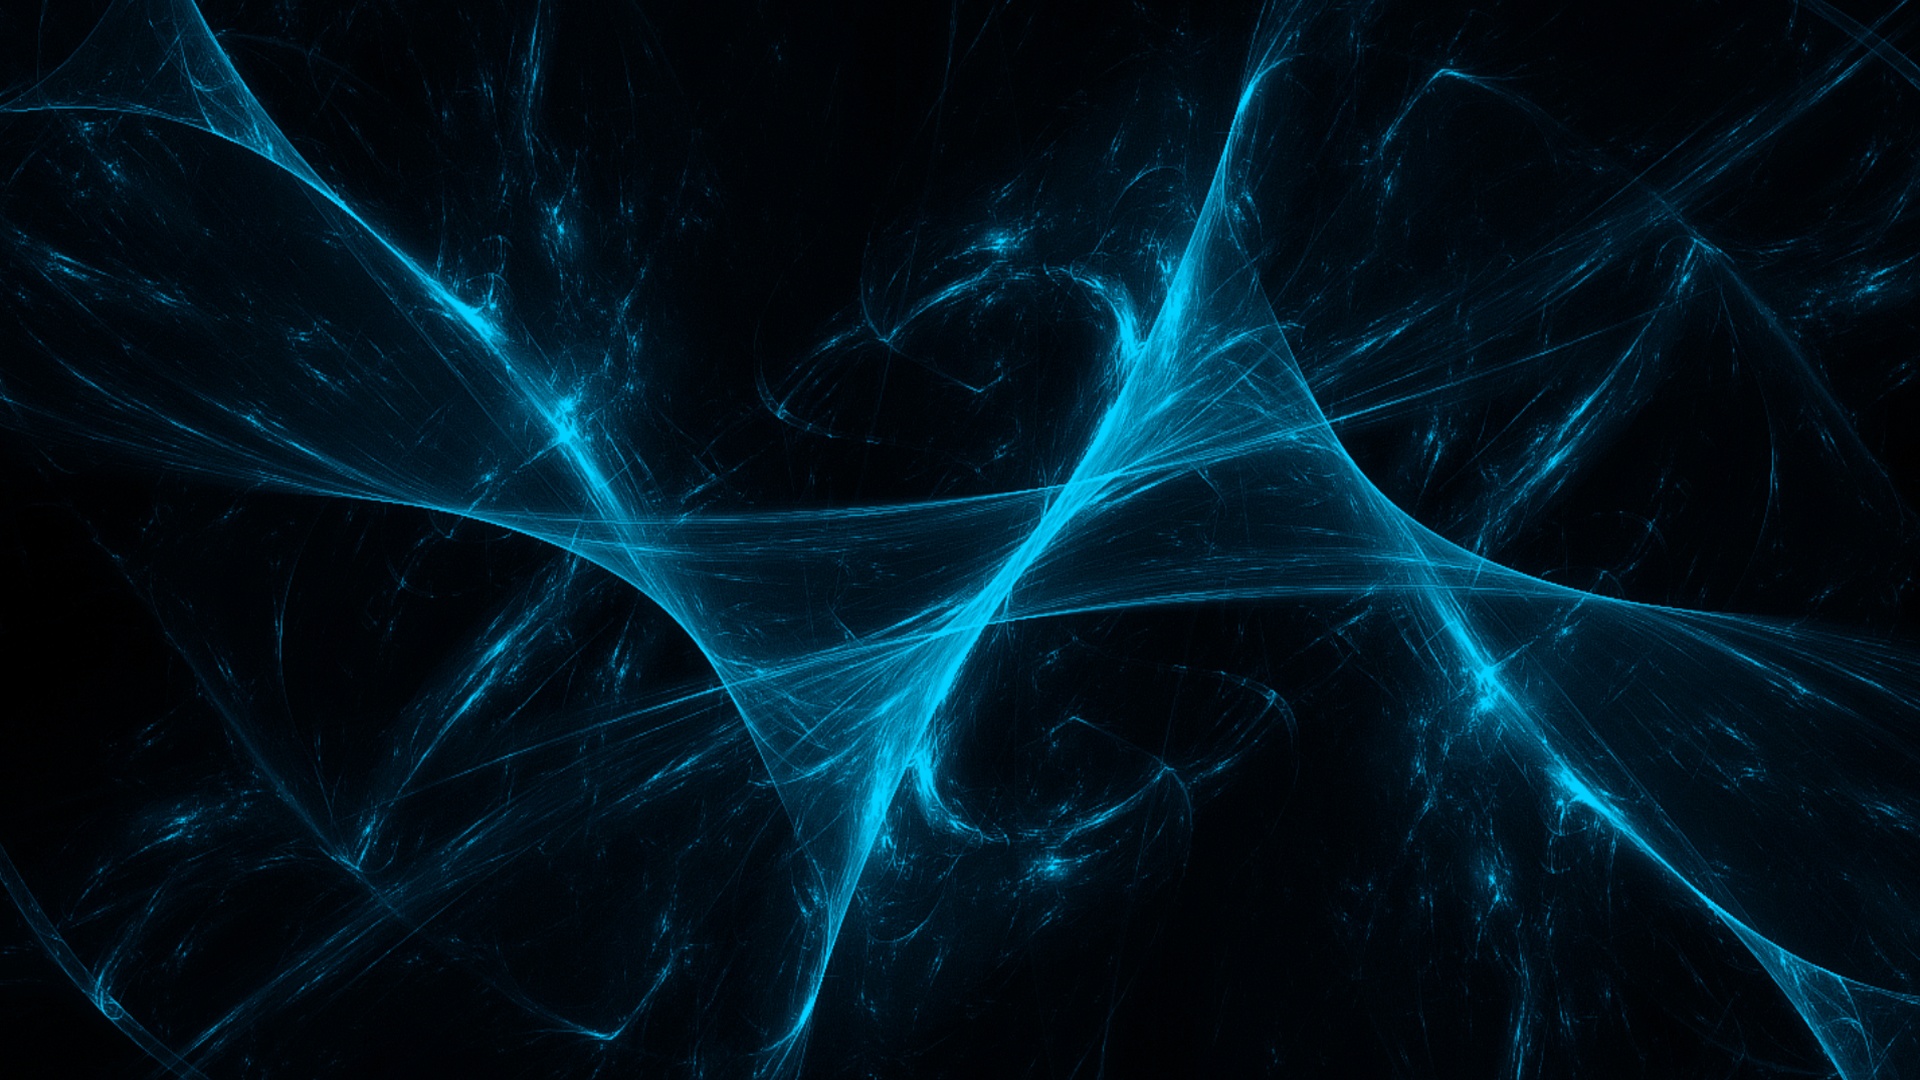 High Res Abstract Backgrounds wallpaper | 1920x1080 | #10648